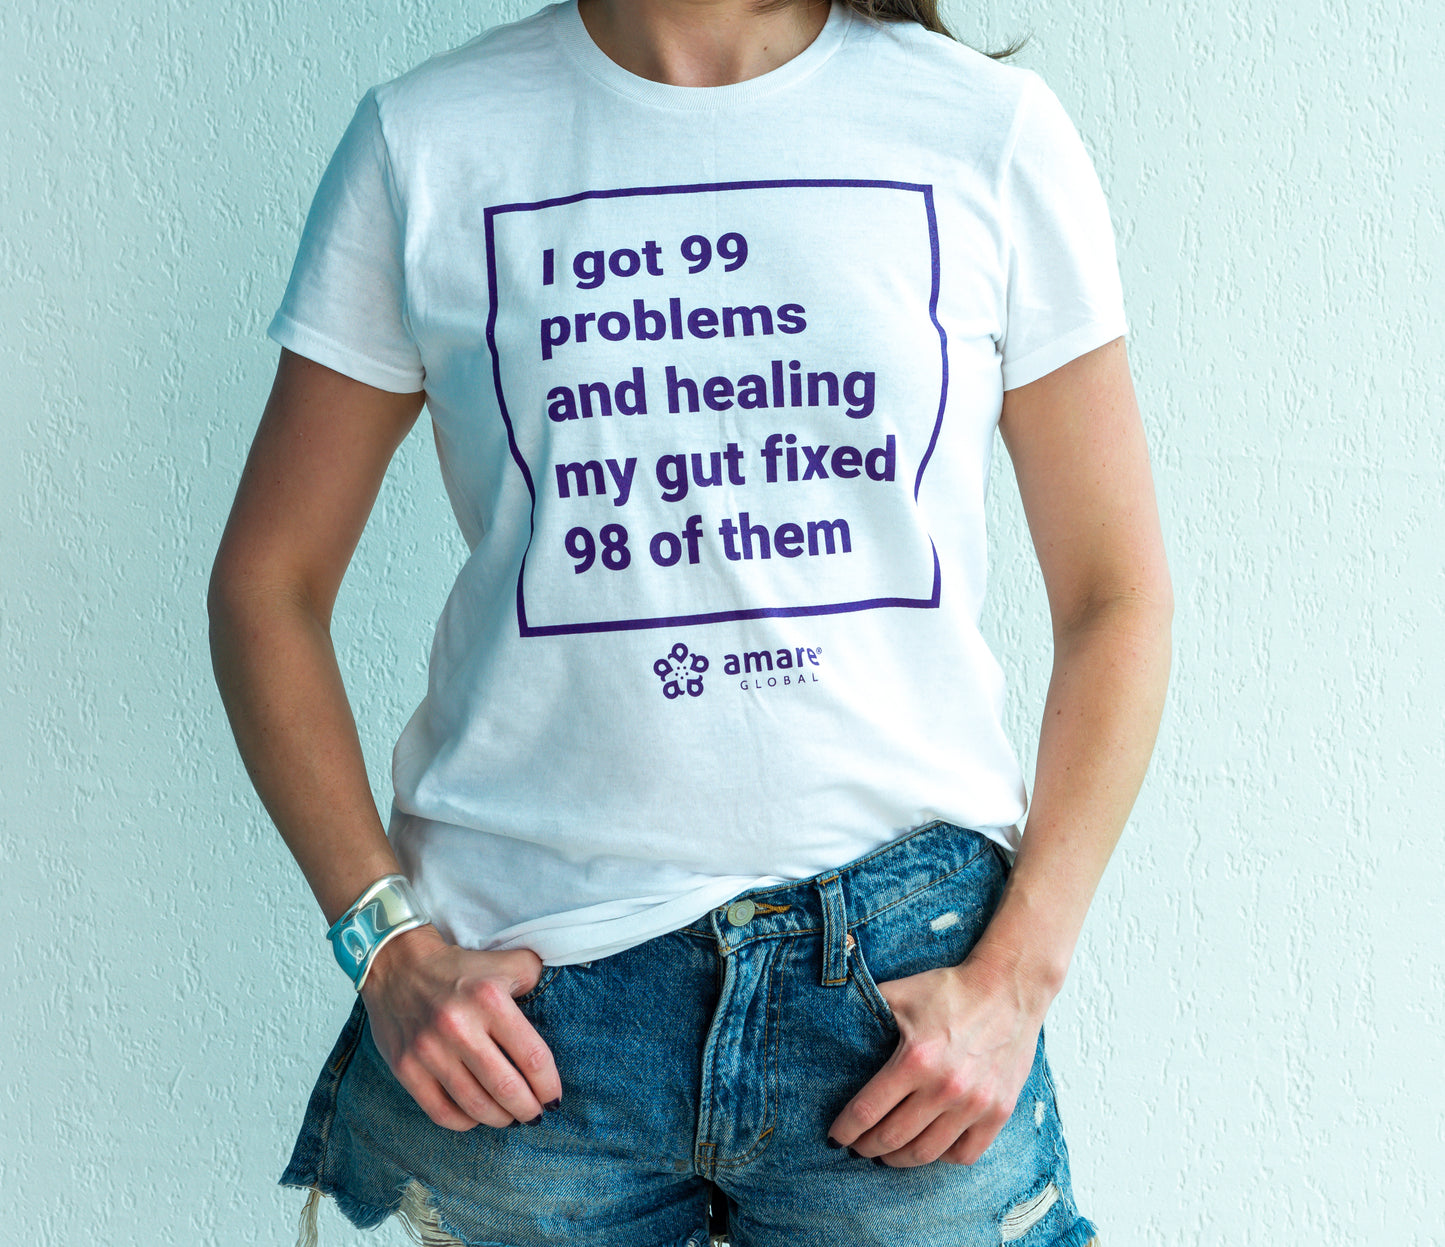 T-shirt - "I got 99 products, my gut ain't one"